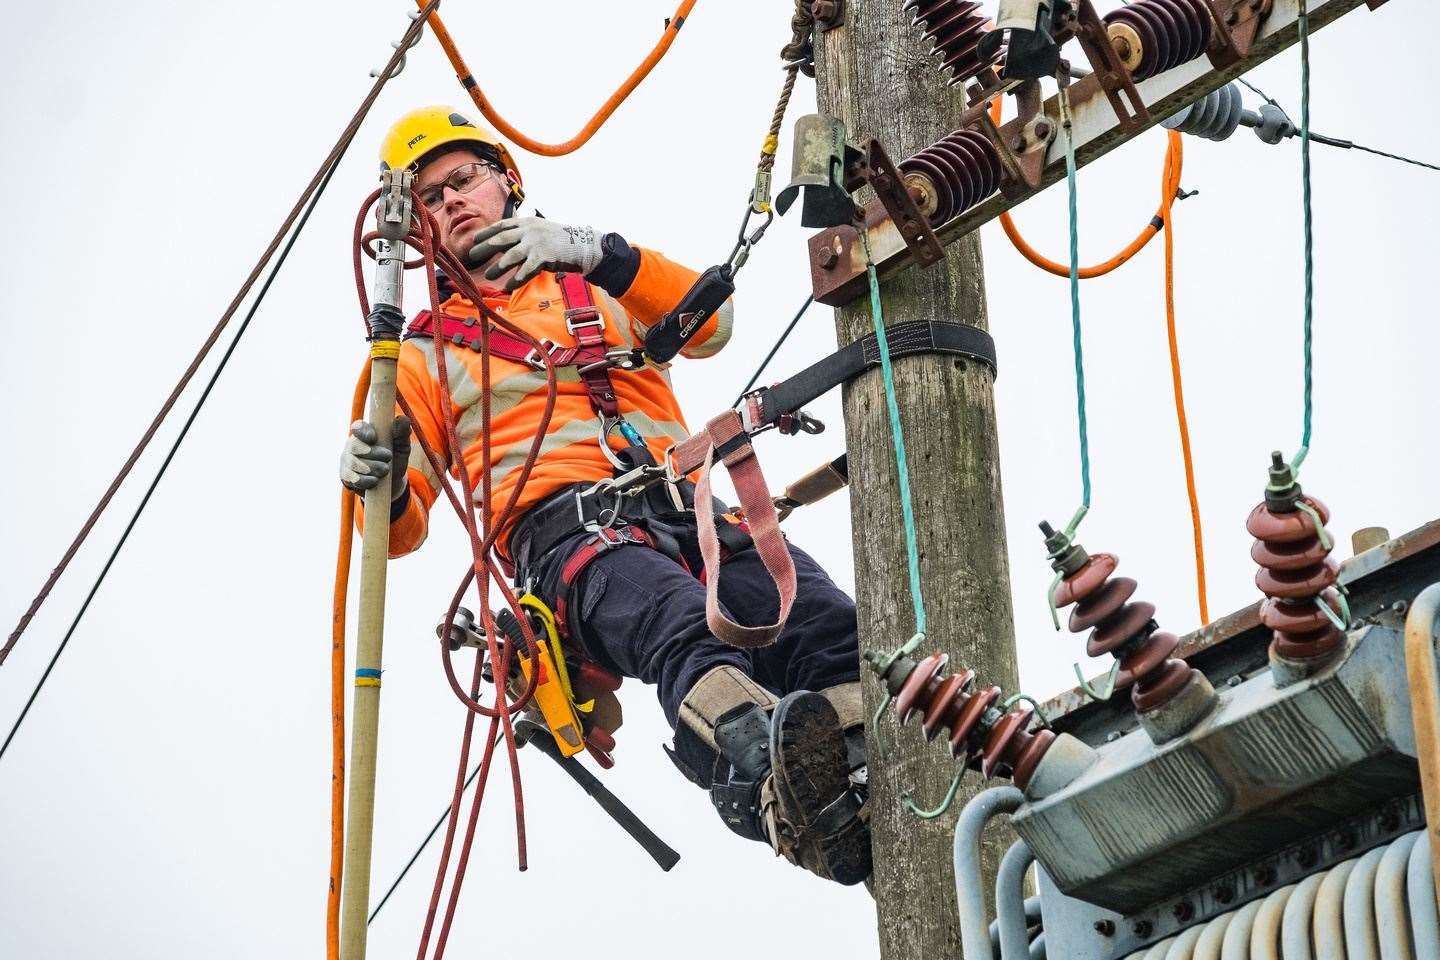 SSEN crews are battling to restore power to thousands of homes across the north-east.